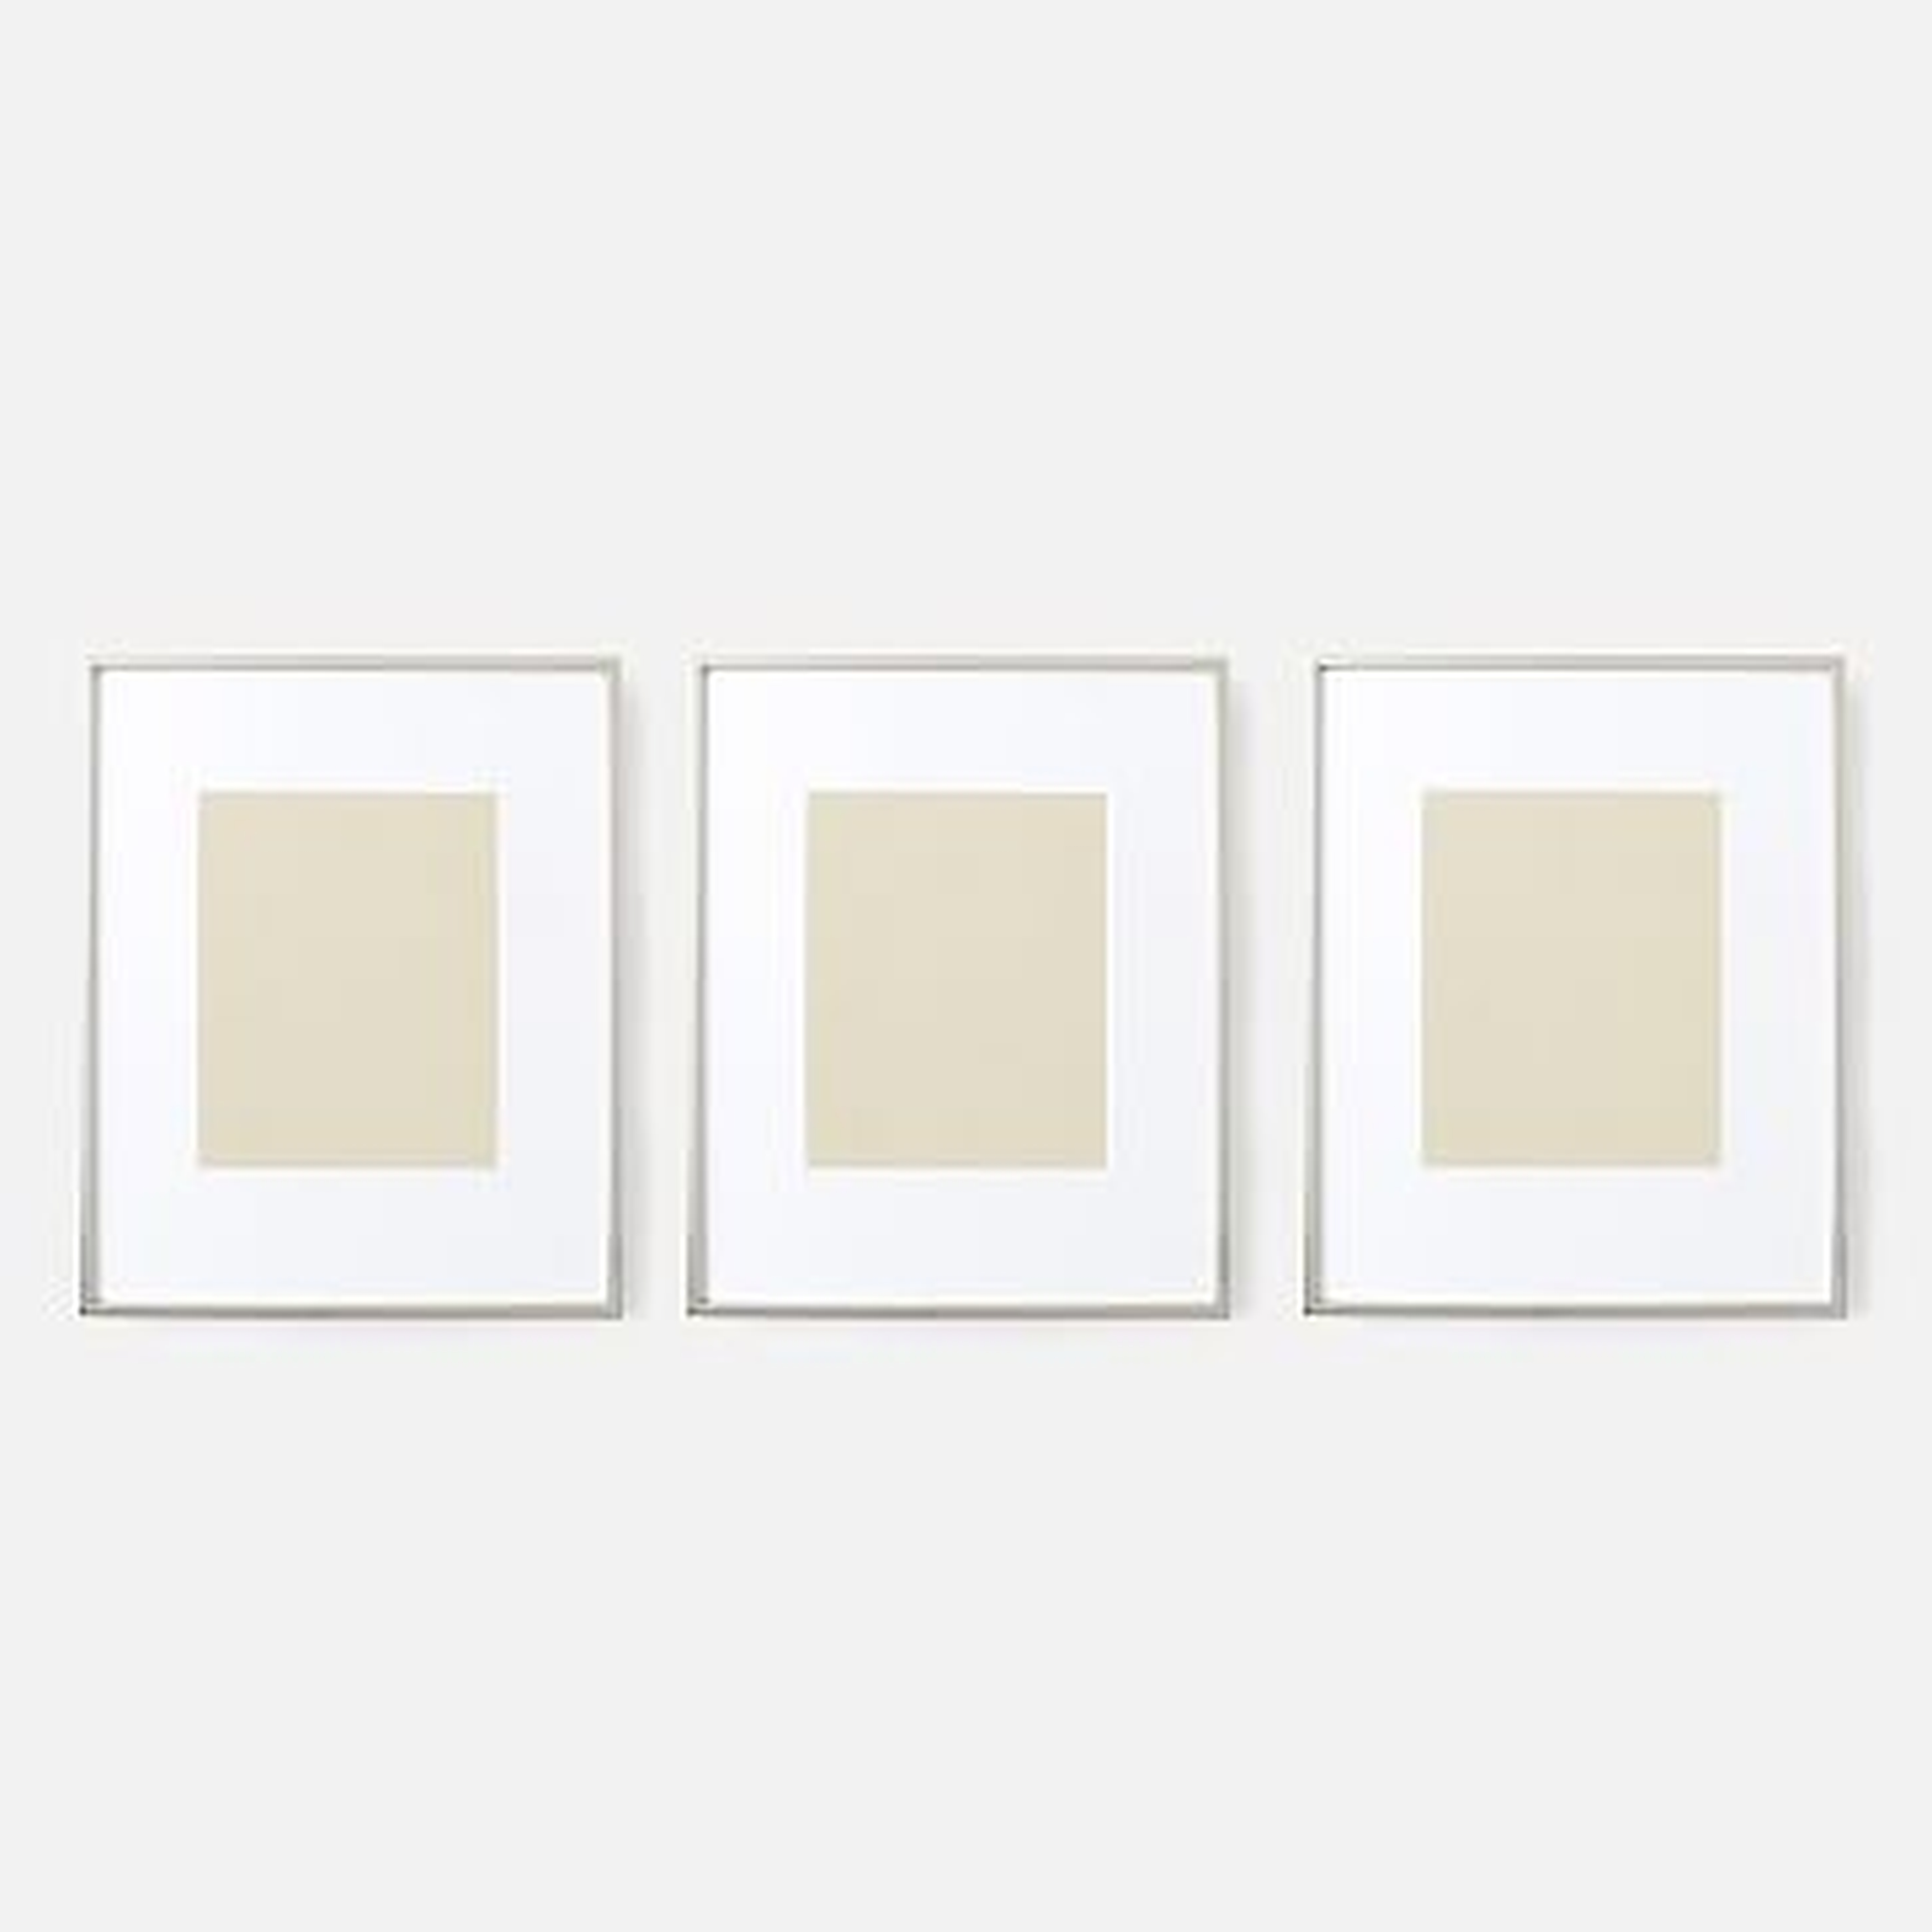 Gallery Frame, Polished Nickel, Set of 3, 8" x 10" (13" x 16" without mat) - West Elm